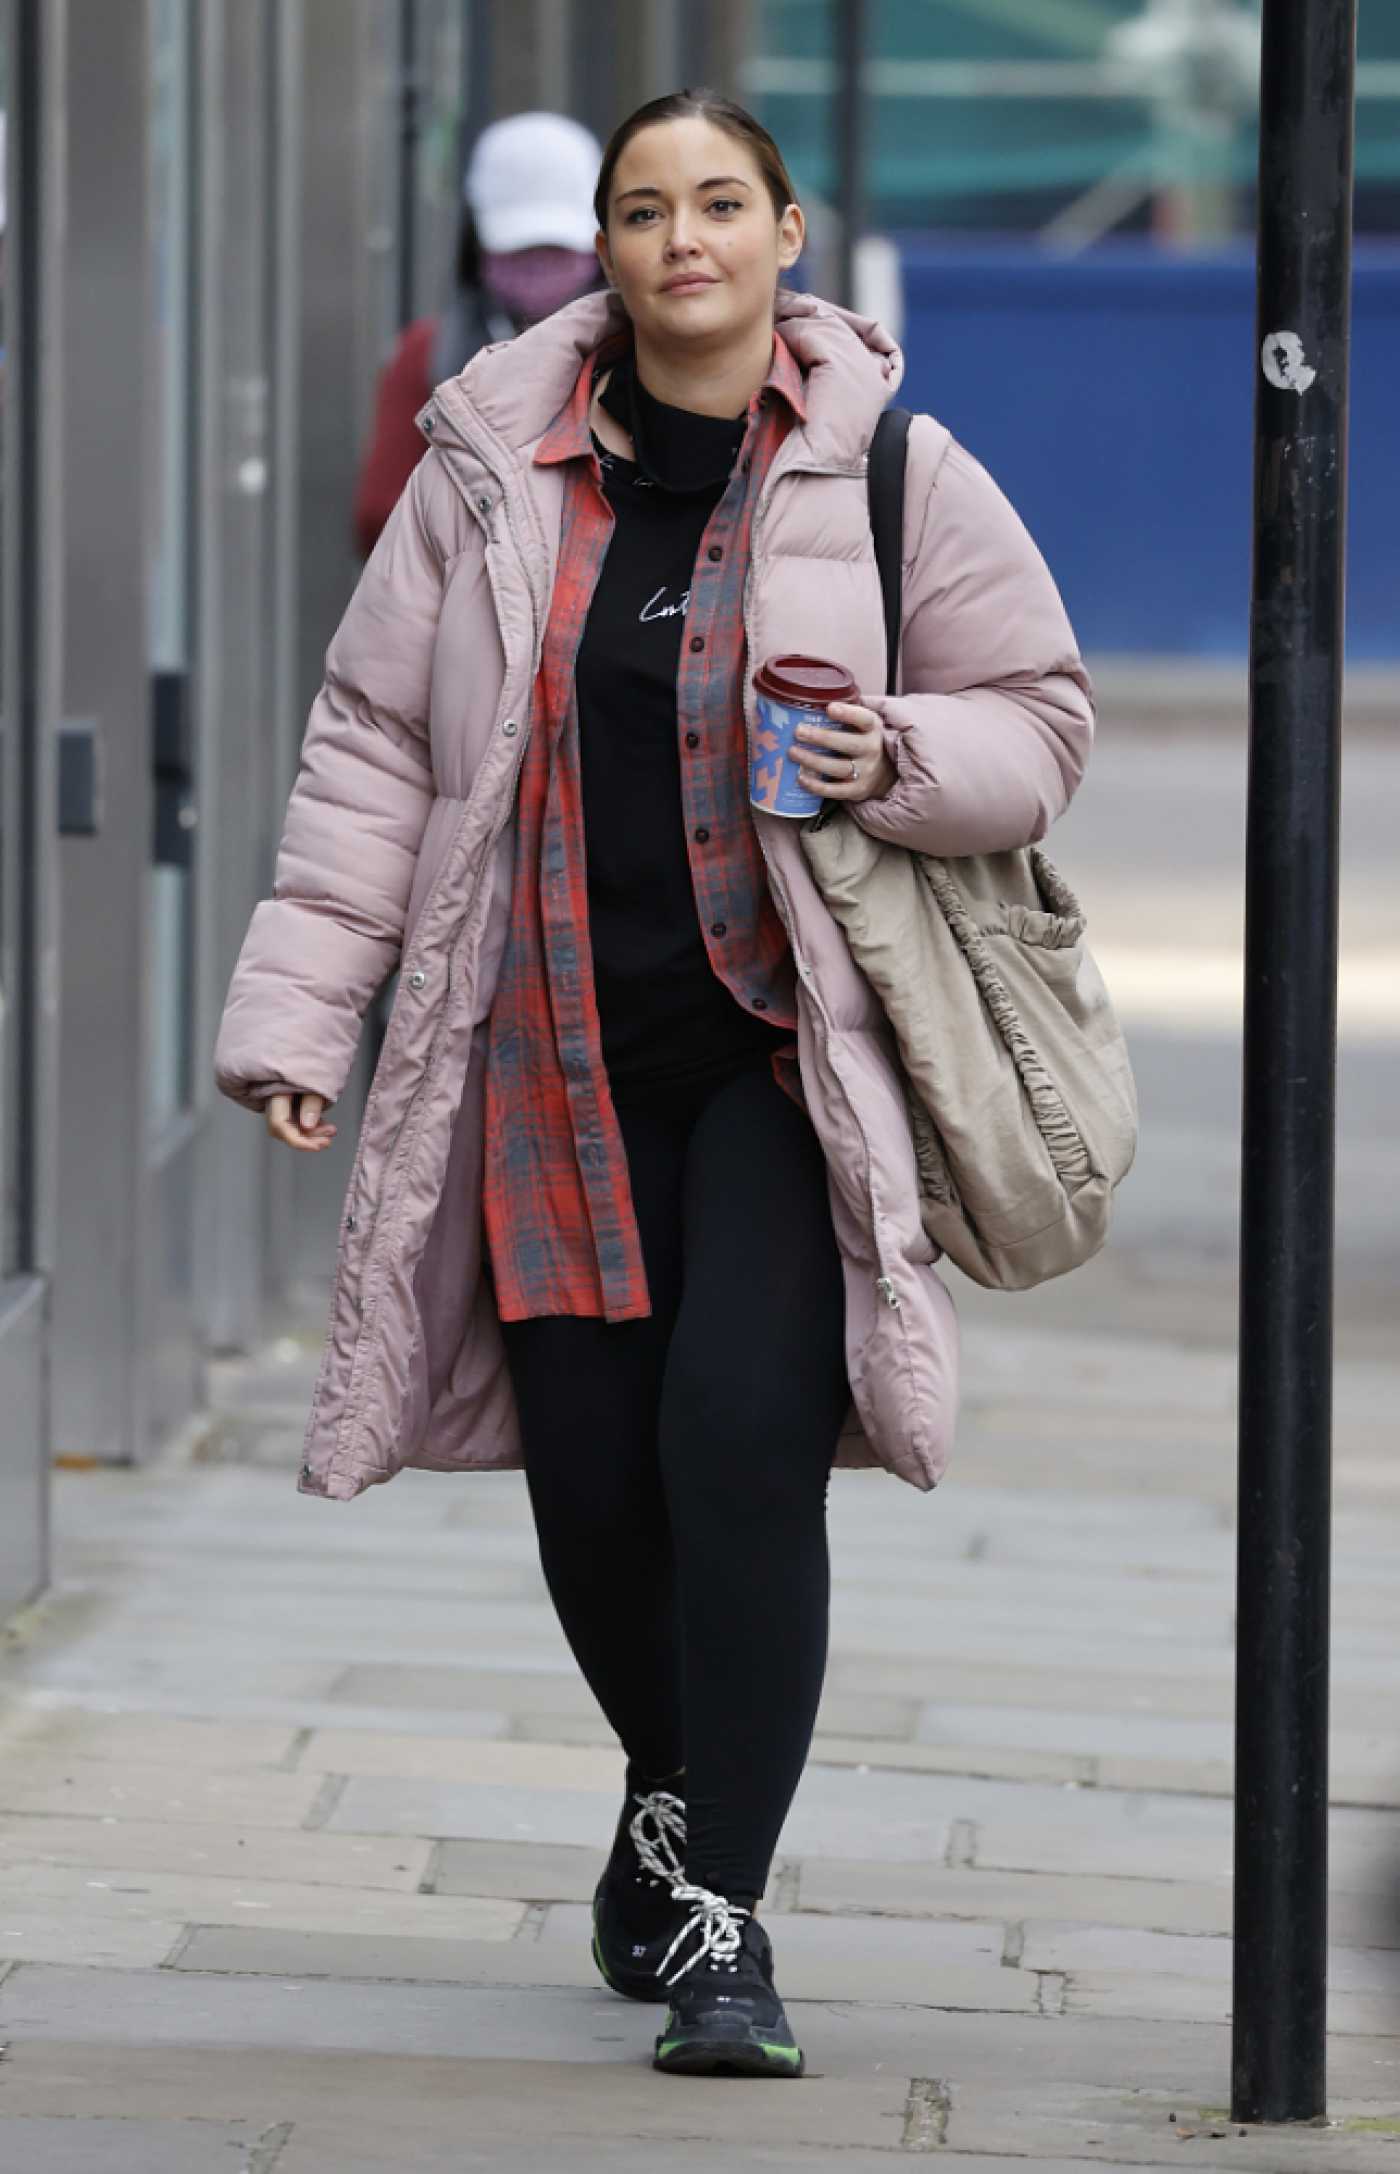 Jacqueline Jossa in a Pink Puffer Coat Was Seen Out in London 11/24/2020